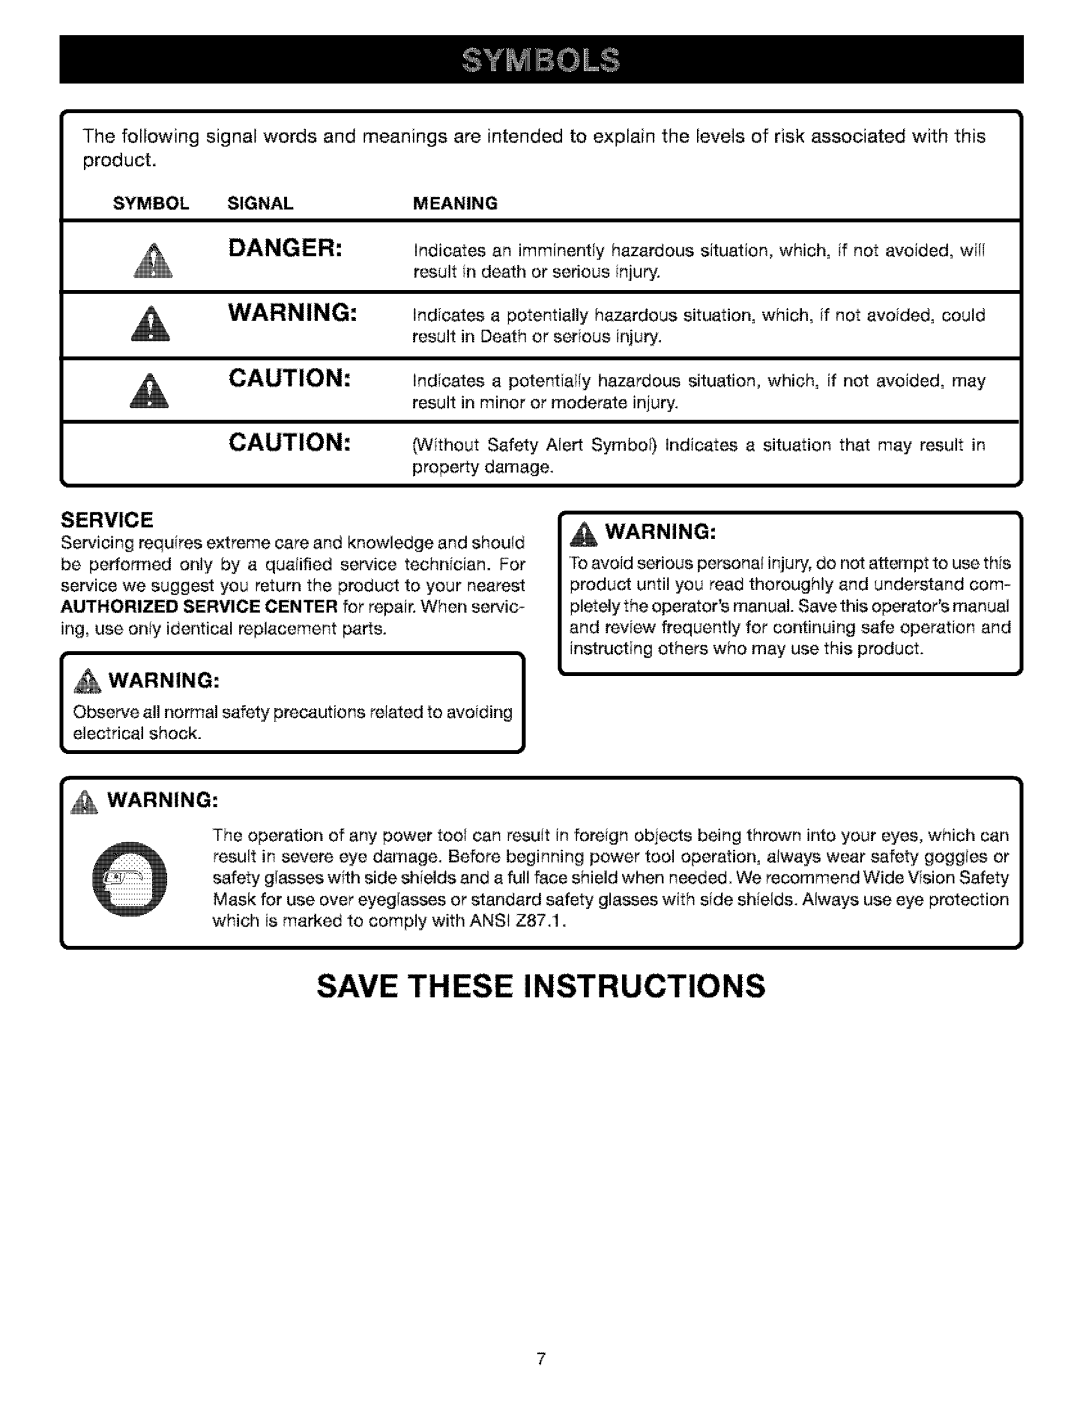 Craftsman 315.11521 manual Danger, Service, Symbol Signal, Meaning, Save These Instructions 